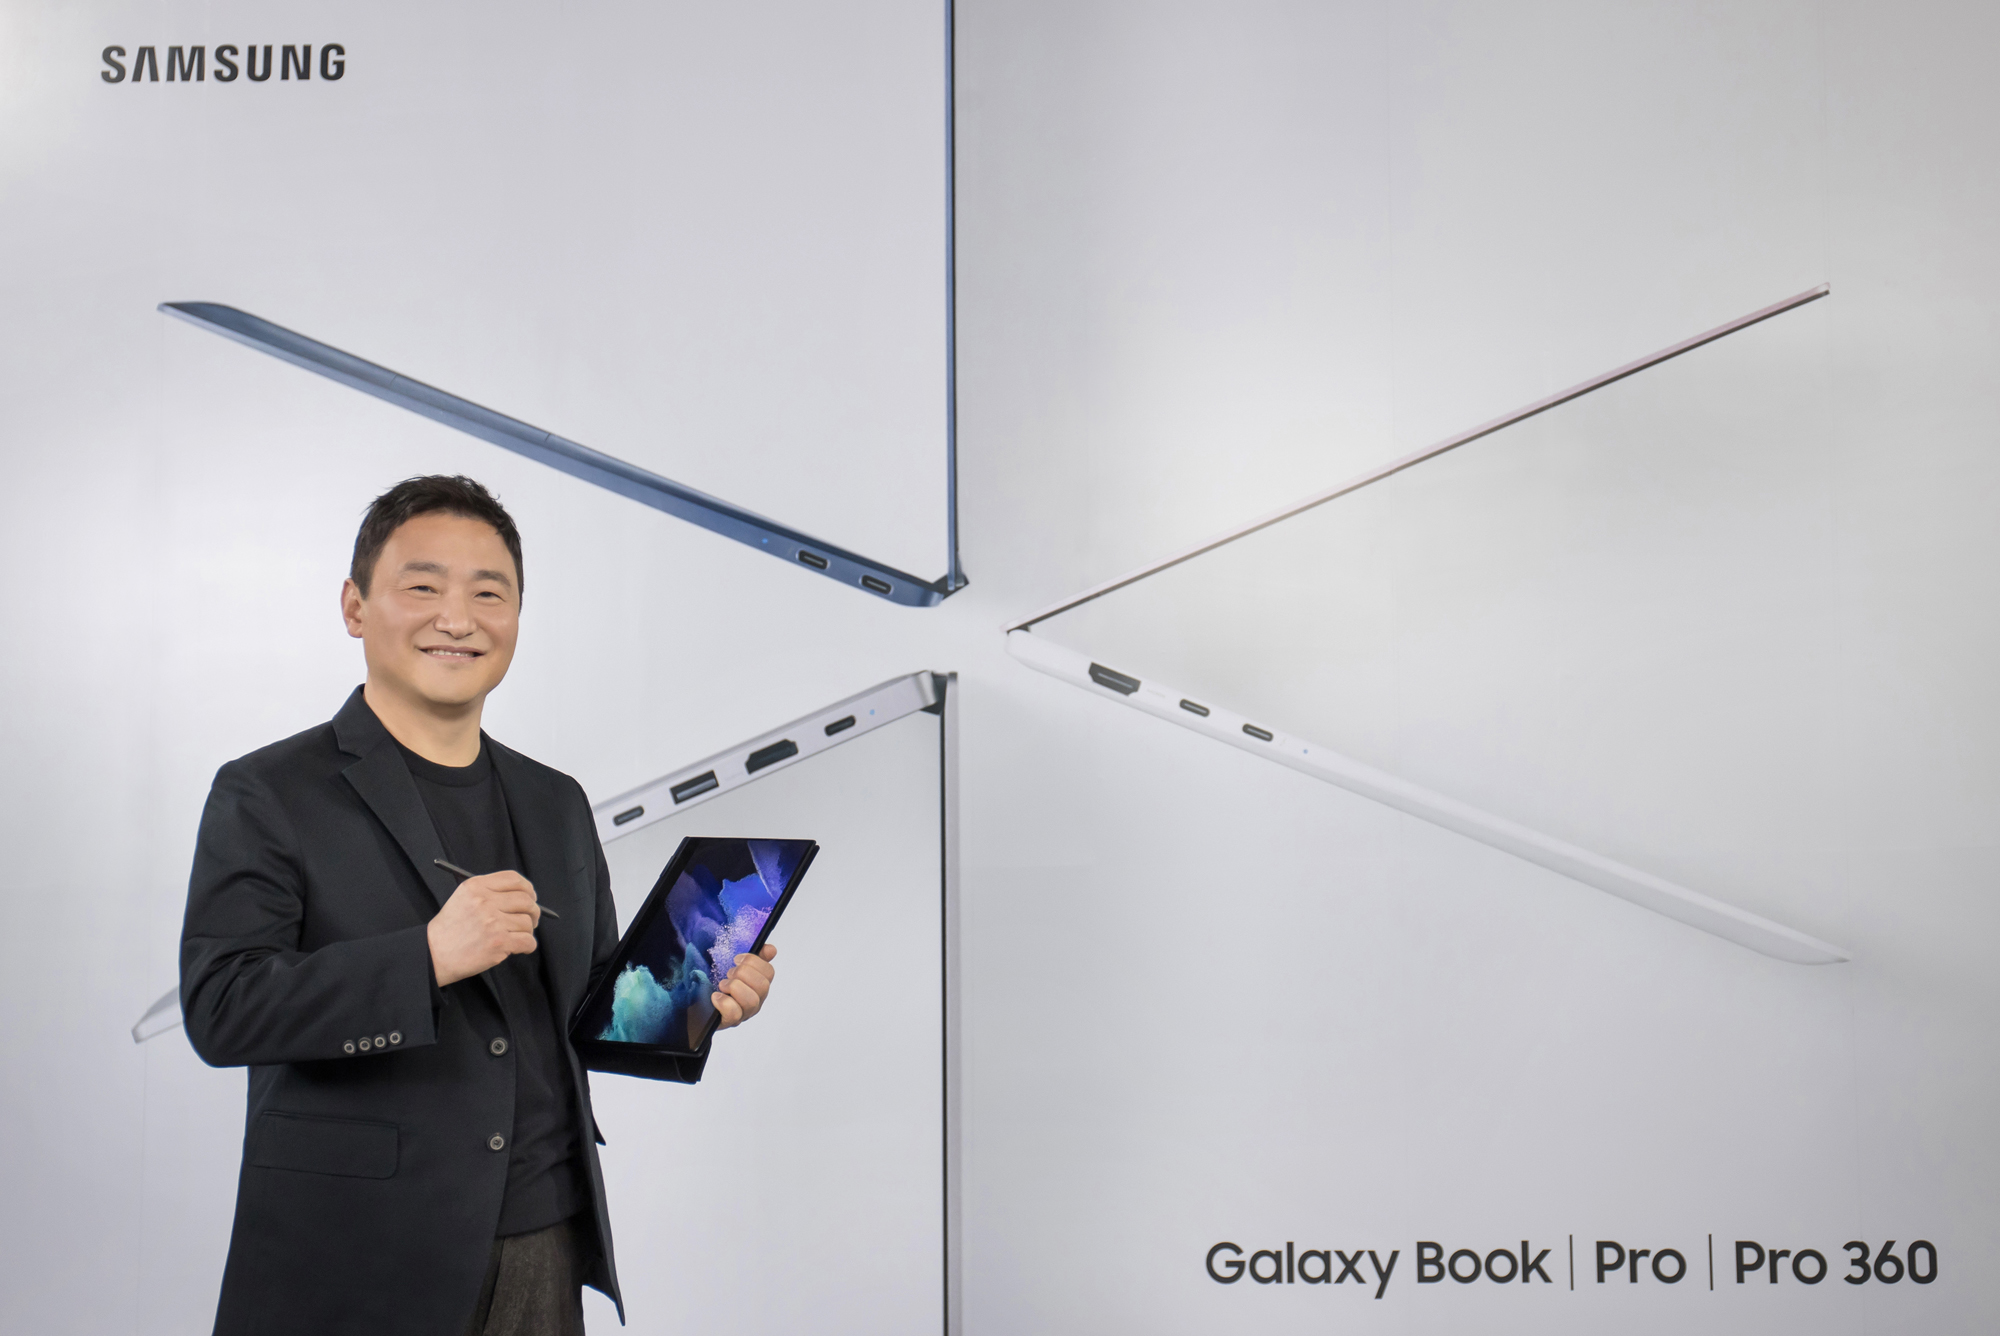 A man dressed wearing a dark suit jacket holding a Galaxy Book Pro 360 with his left hand while holding a S Pen with his right standing in front of a key visual image of galaxy book galaxy book pro and galaxy book pro 360